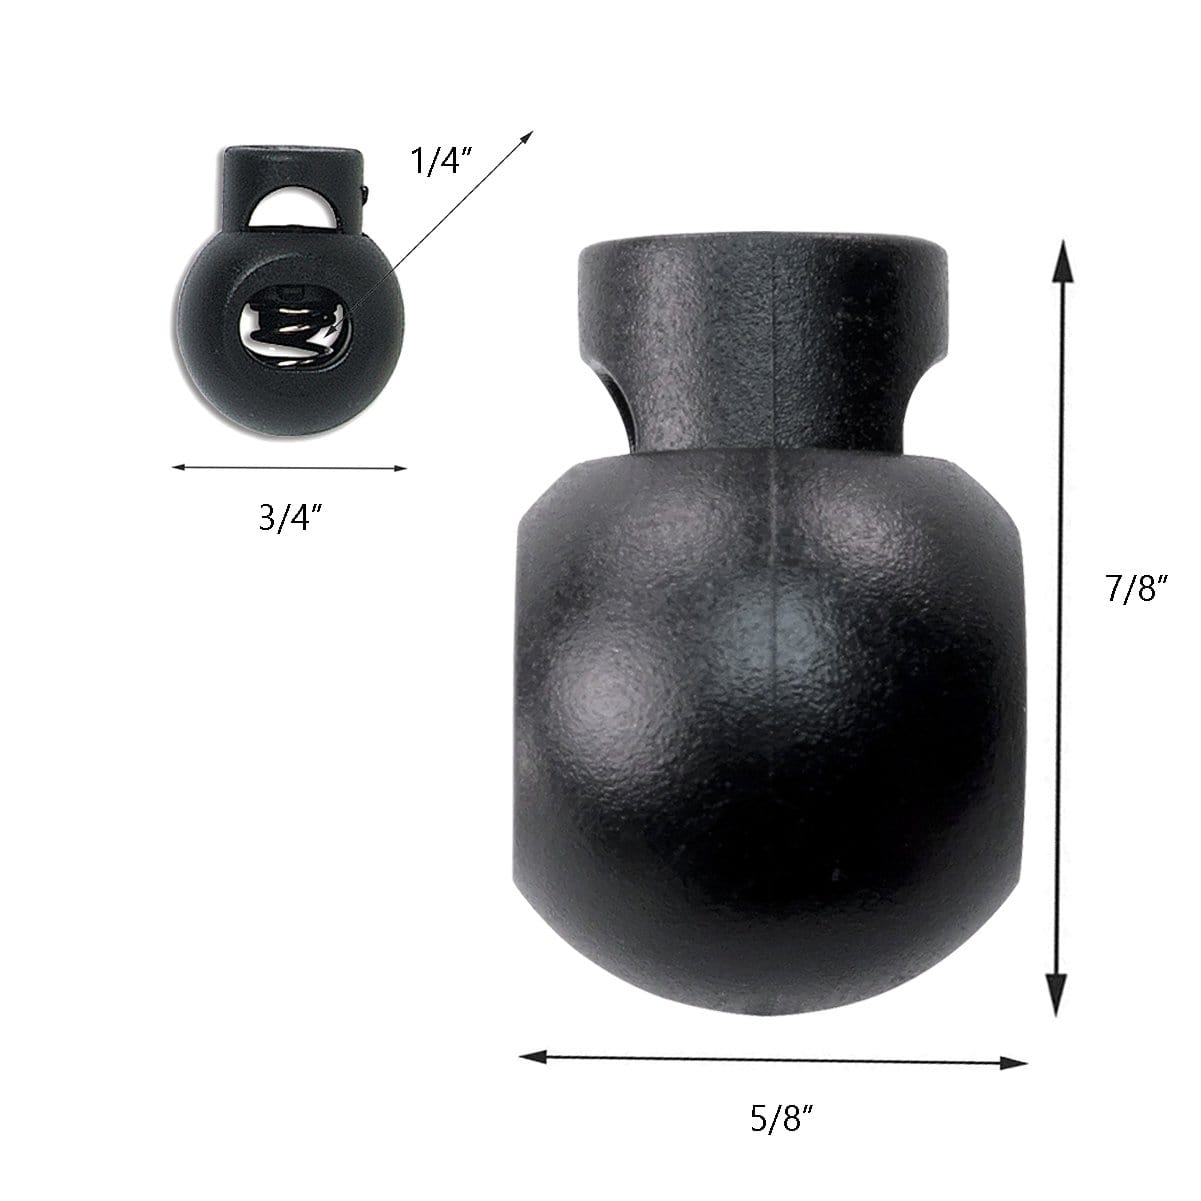 A black plastic Adjustable Cord Lock - Round Ball Style - Single Hole End Toggle for DIY Projects (2135-4001) with dimensions: height 7/8 inch, width 5/8 inch, and top diameter 3/4 inch. A side view shows a 1/4 inch hole, ideal for use as toggle fasteners.